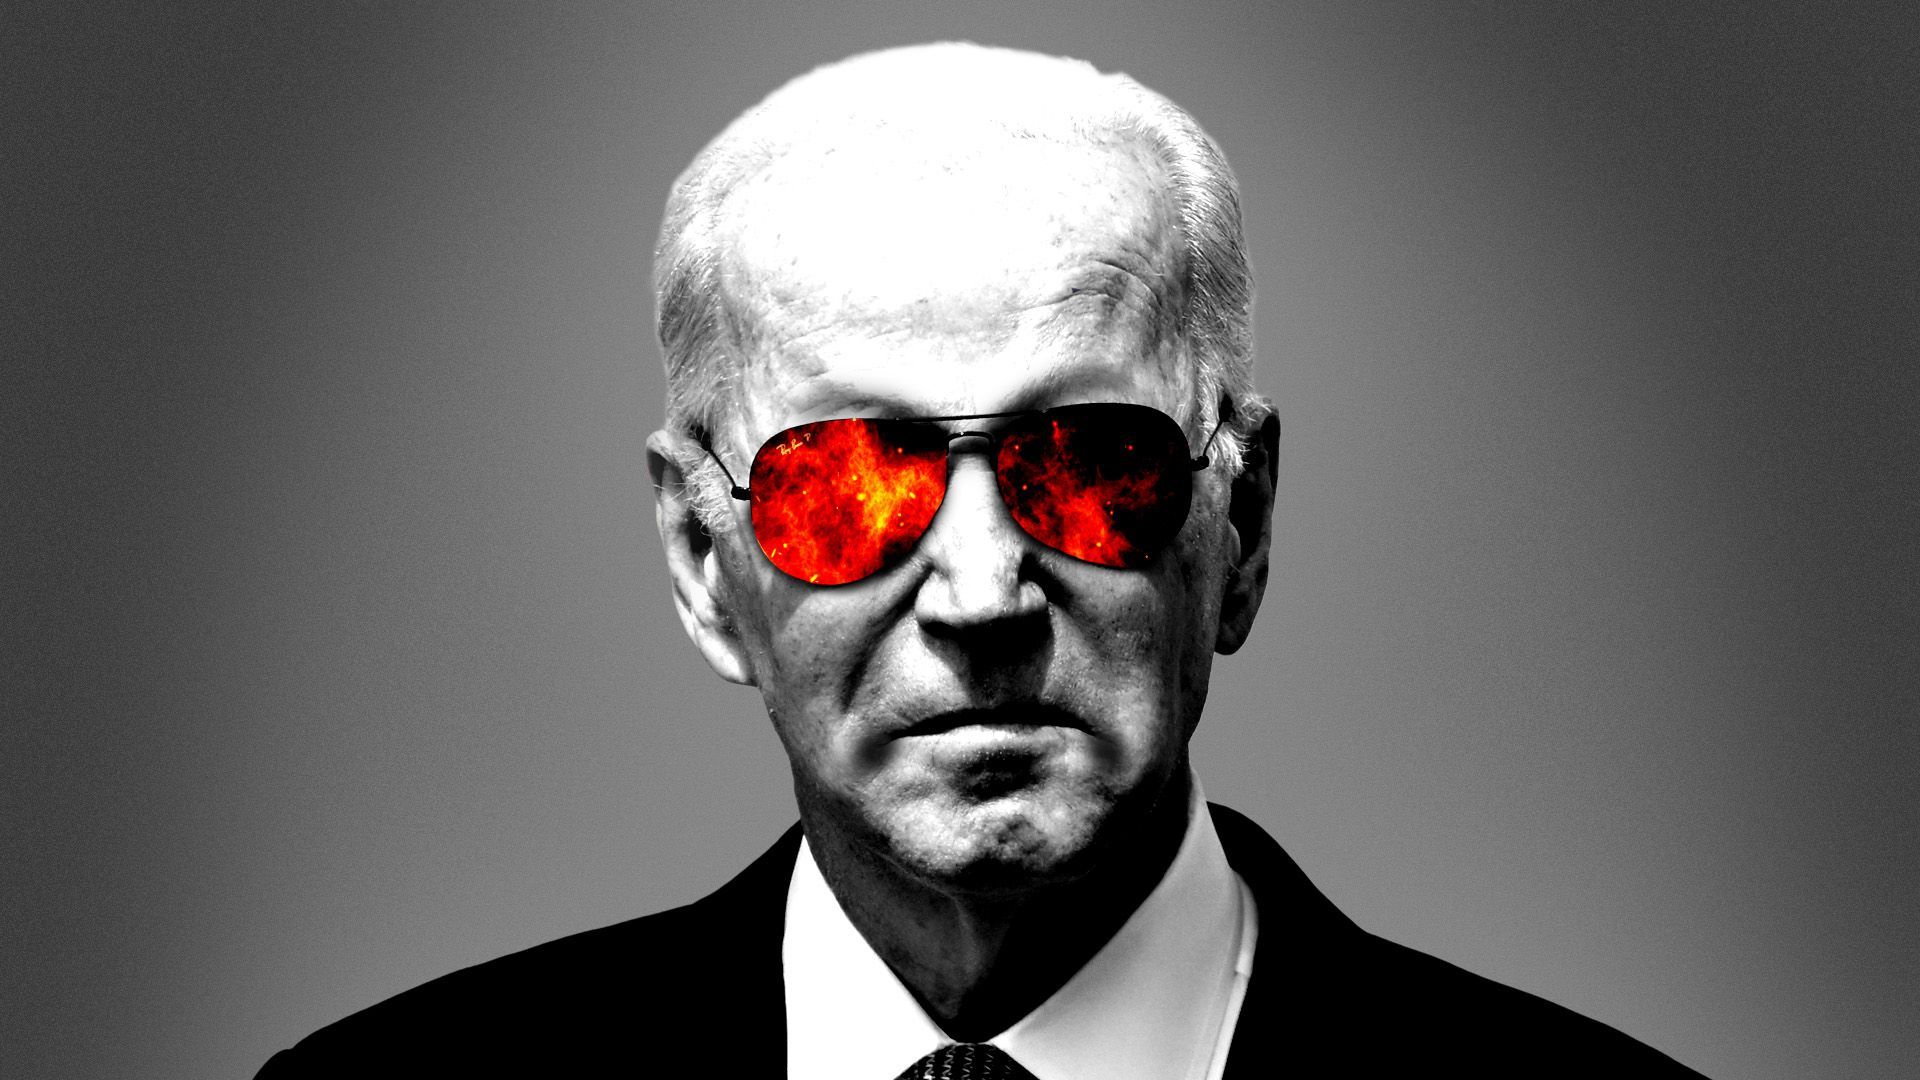 Photo illustration of an angry-looking President Biden wearing sunglasses reflecting flames